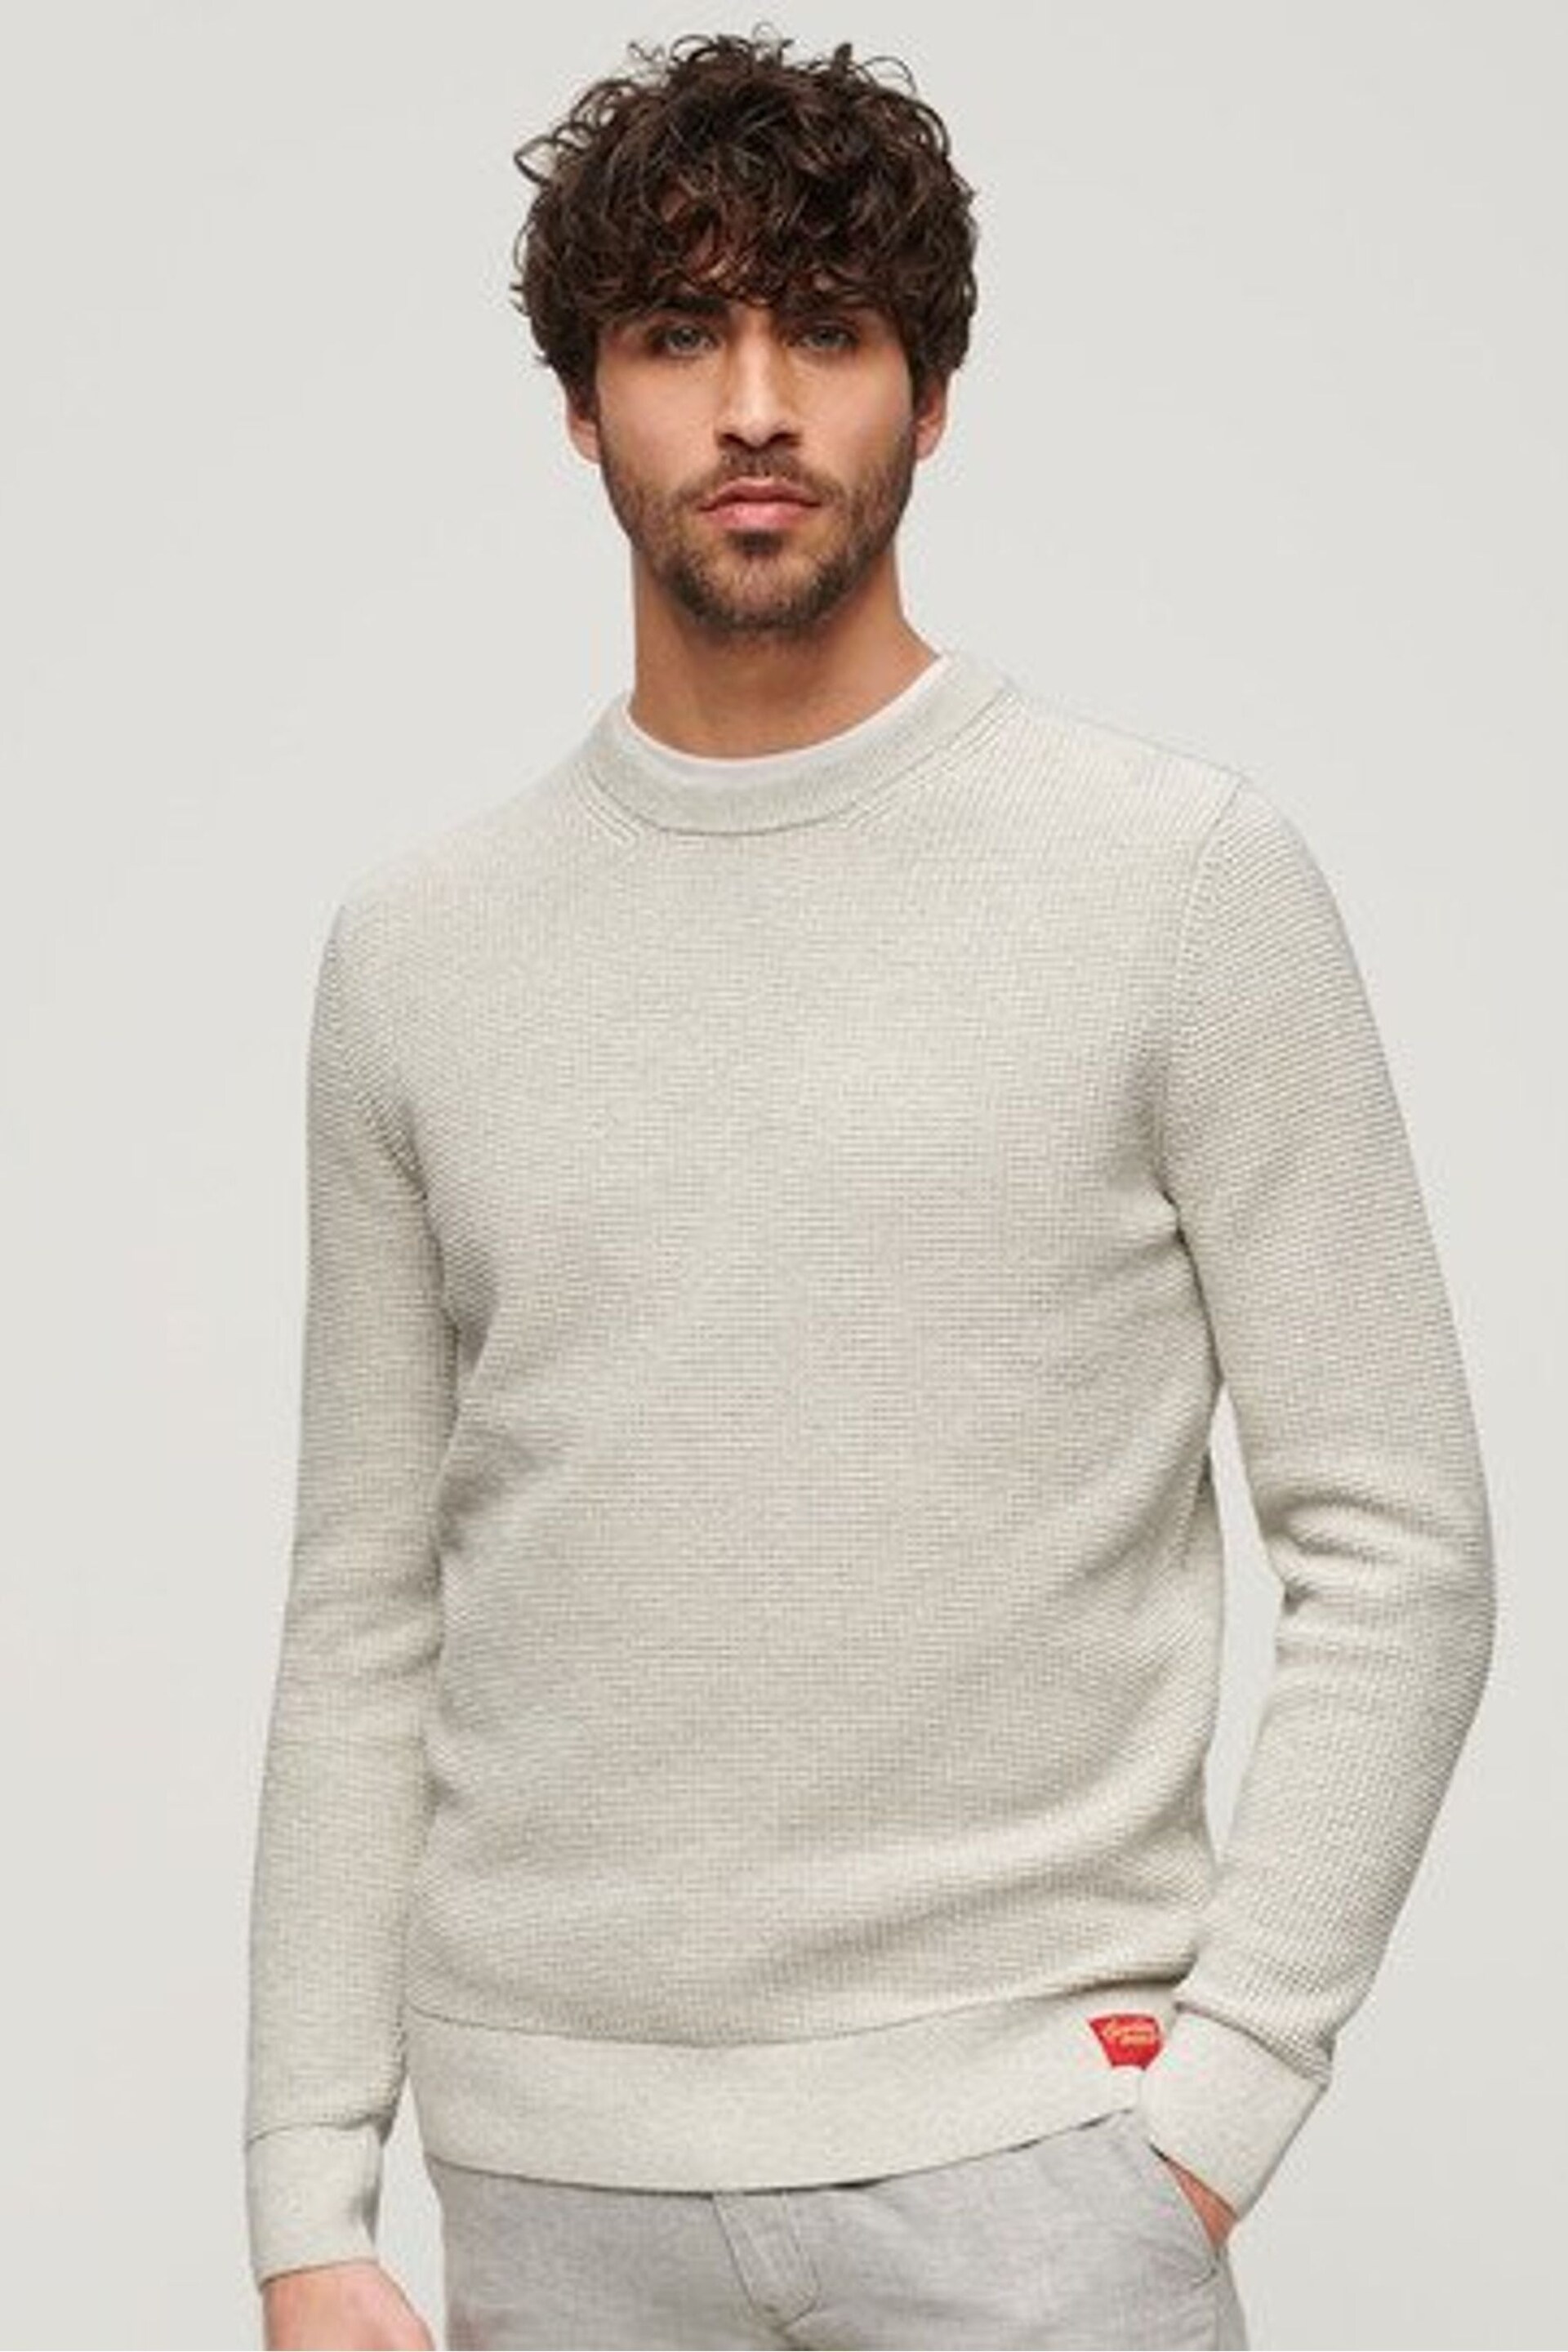 Superdry Grey Textured Crew Knitted Jumper - Image 1 of 6